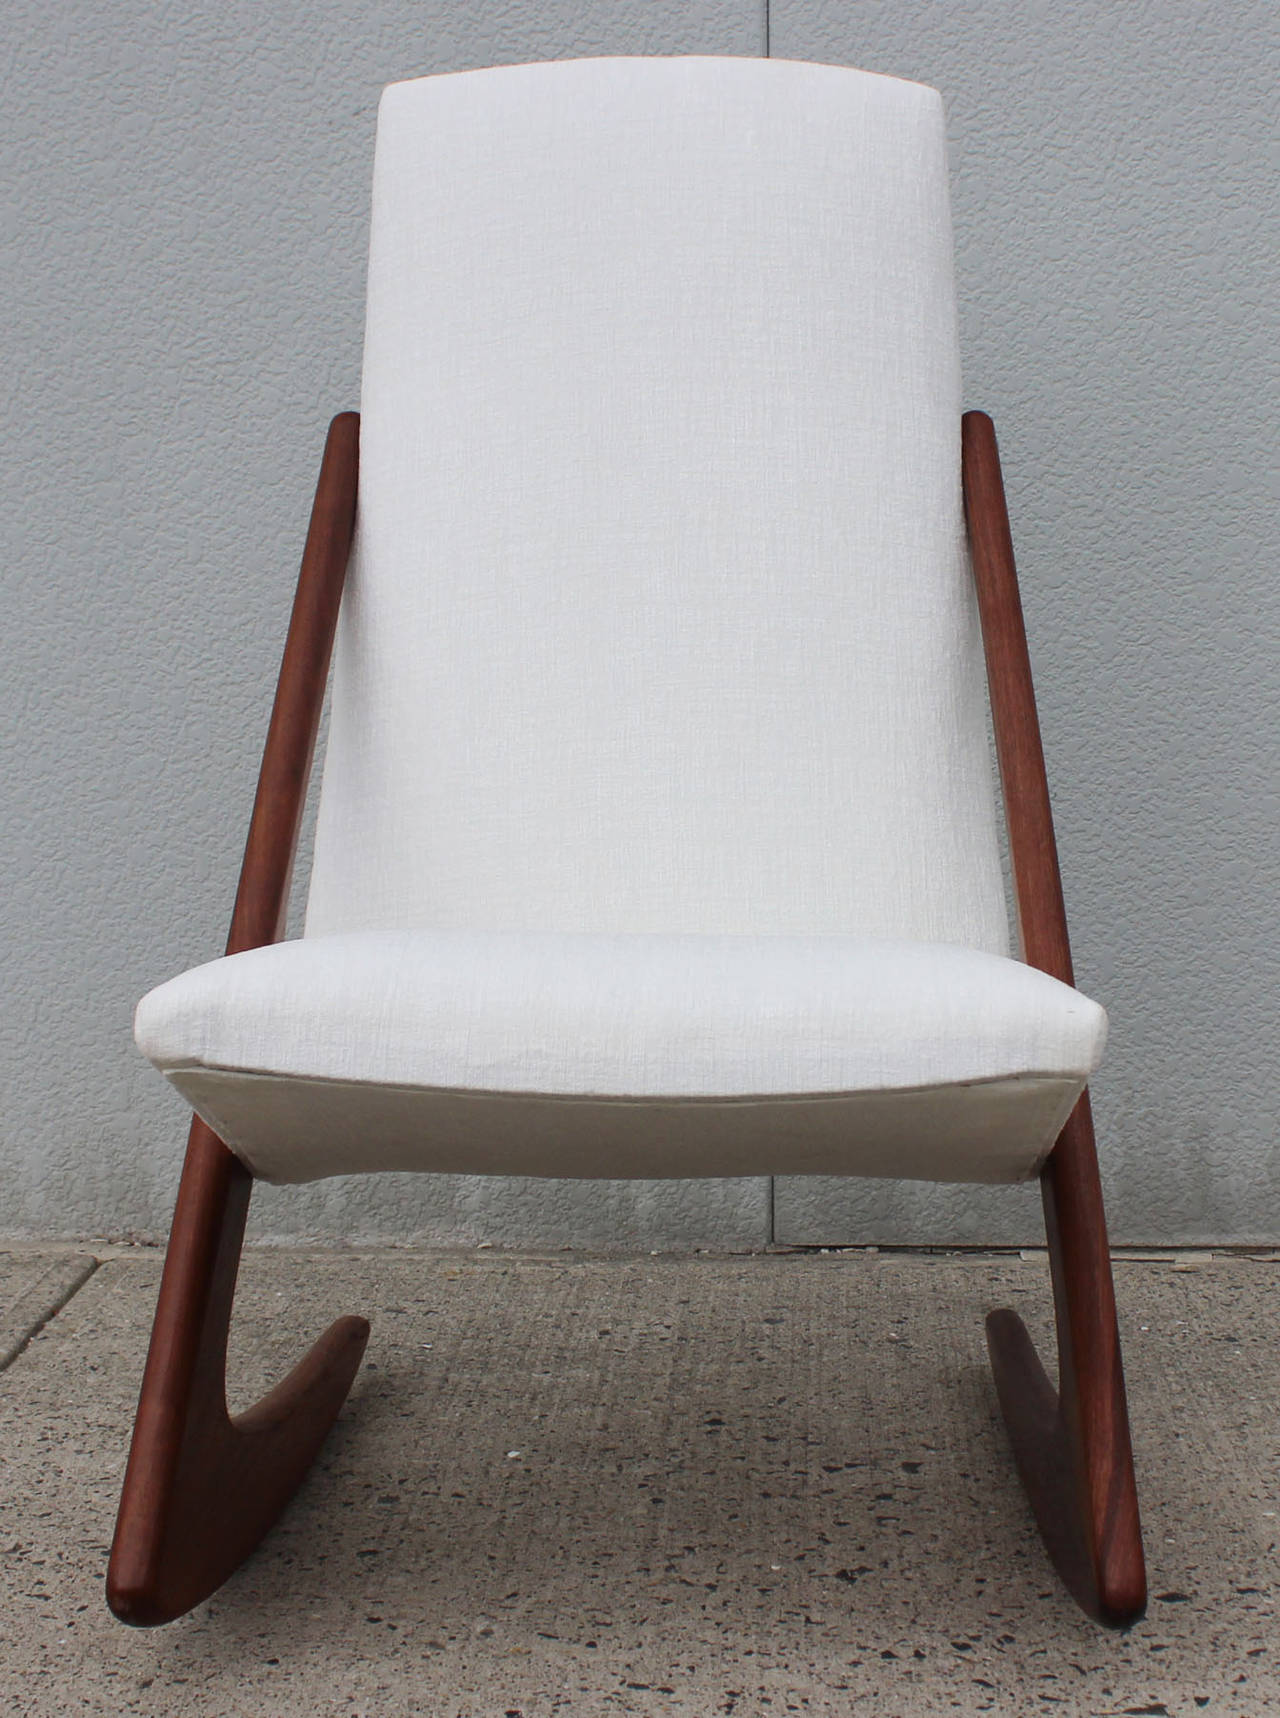 Fabulous teak frame boomerang rocking chair newly upholstered; by Mogens Kold Mobelfabrik, Denmark.

Complementary shipping within 30 miles.